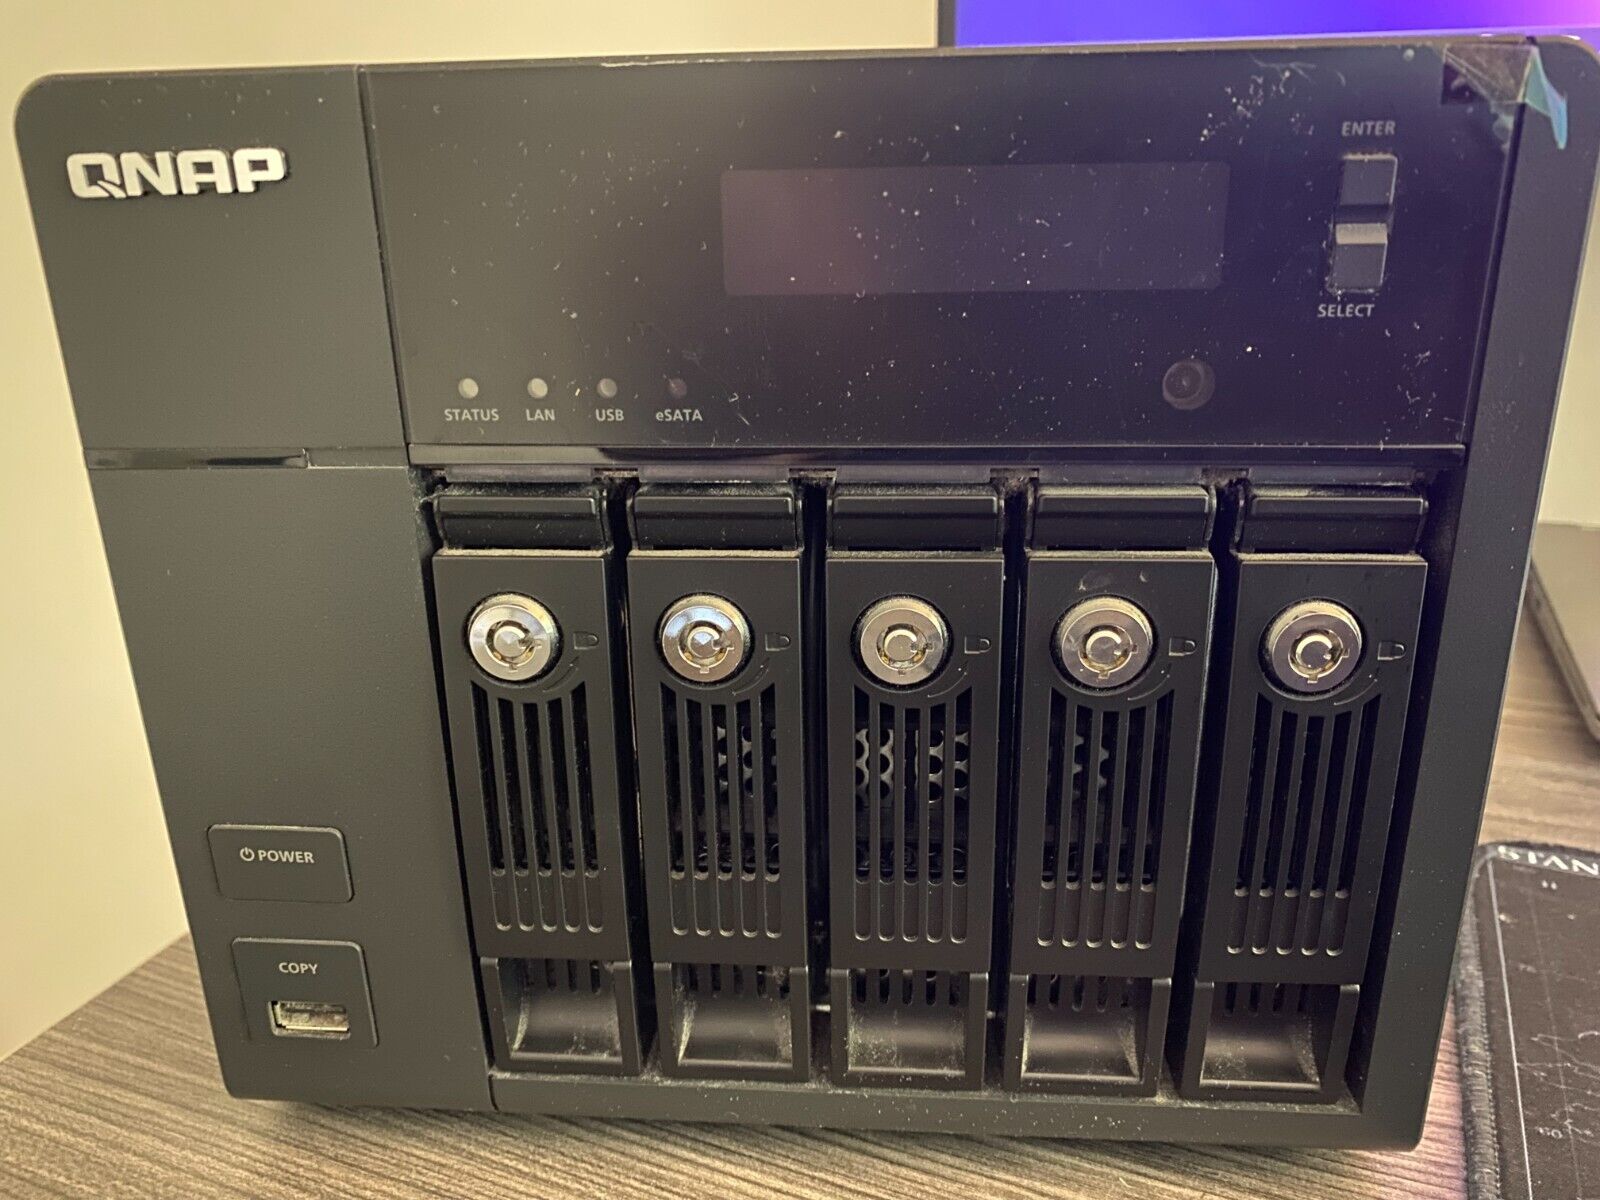 QNAP TS-569 Pro 5-Bay Network Attached Storage NAS with 5 x 4TB HDD